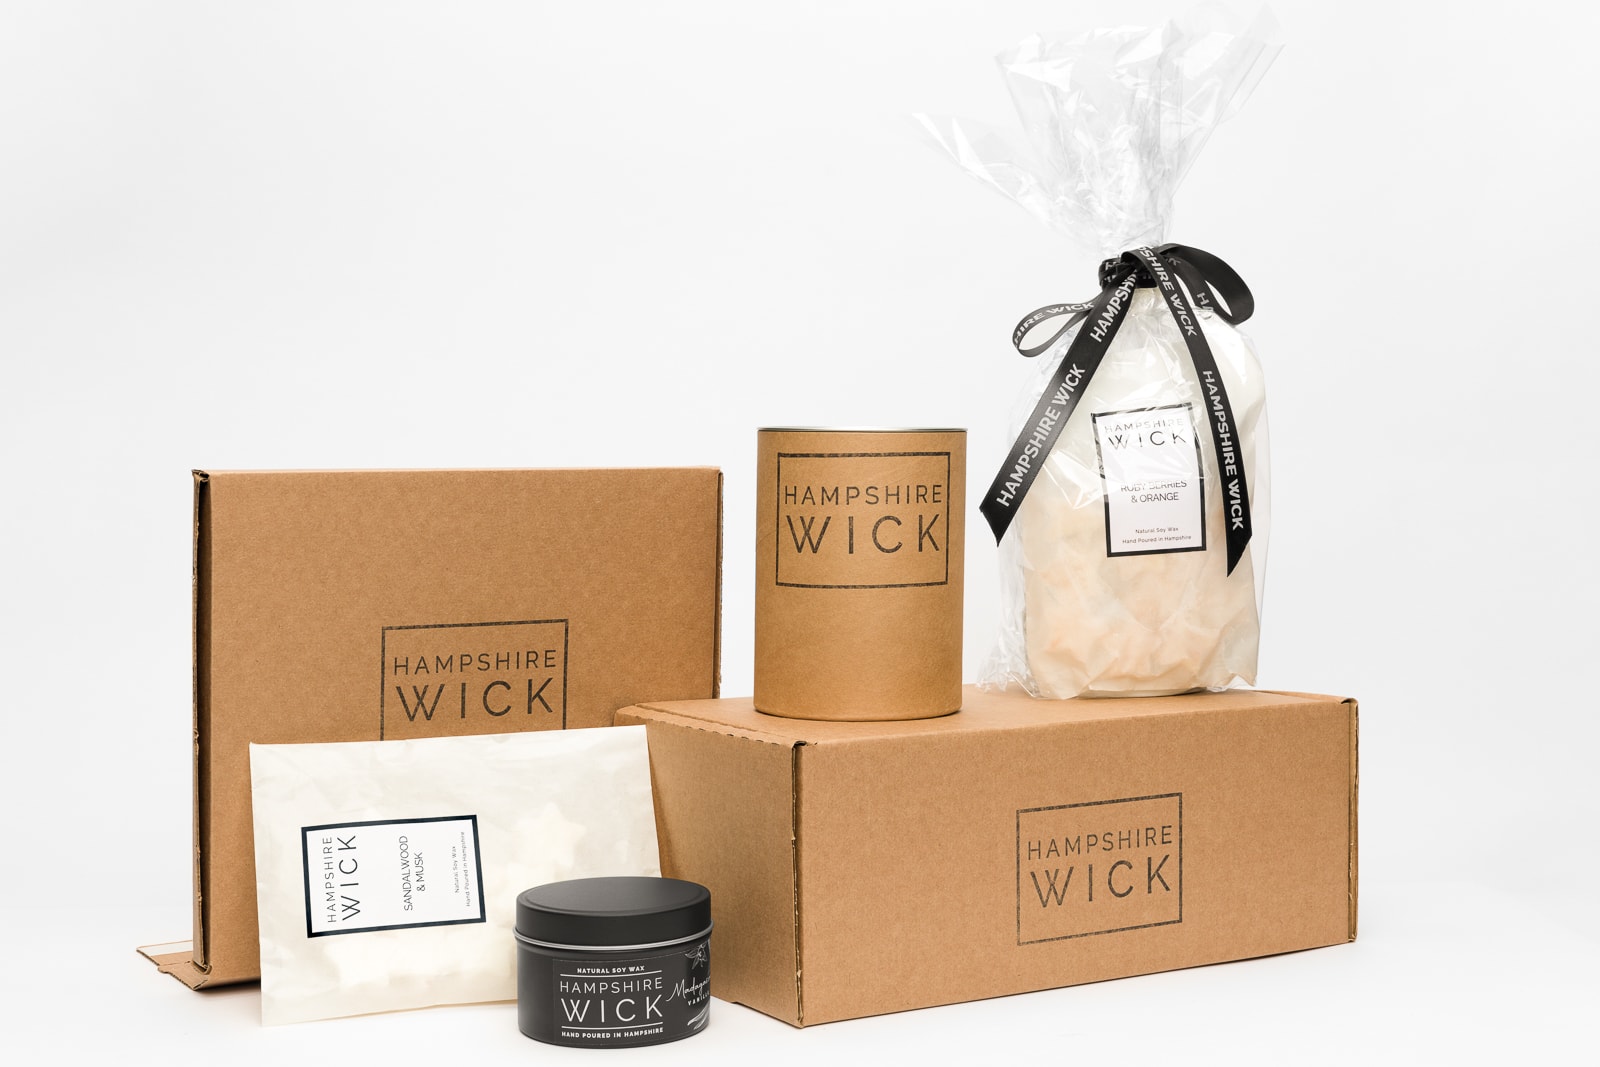 examples of hampshire wick eco friendly packaging